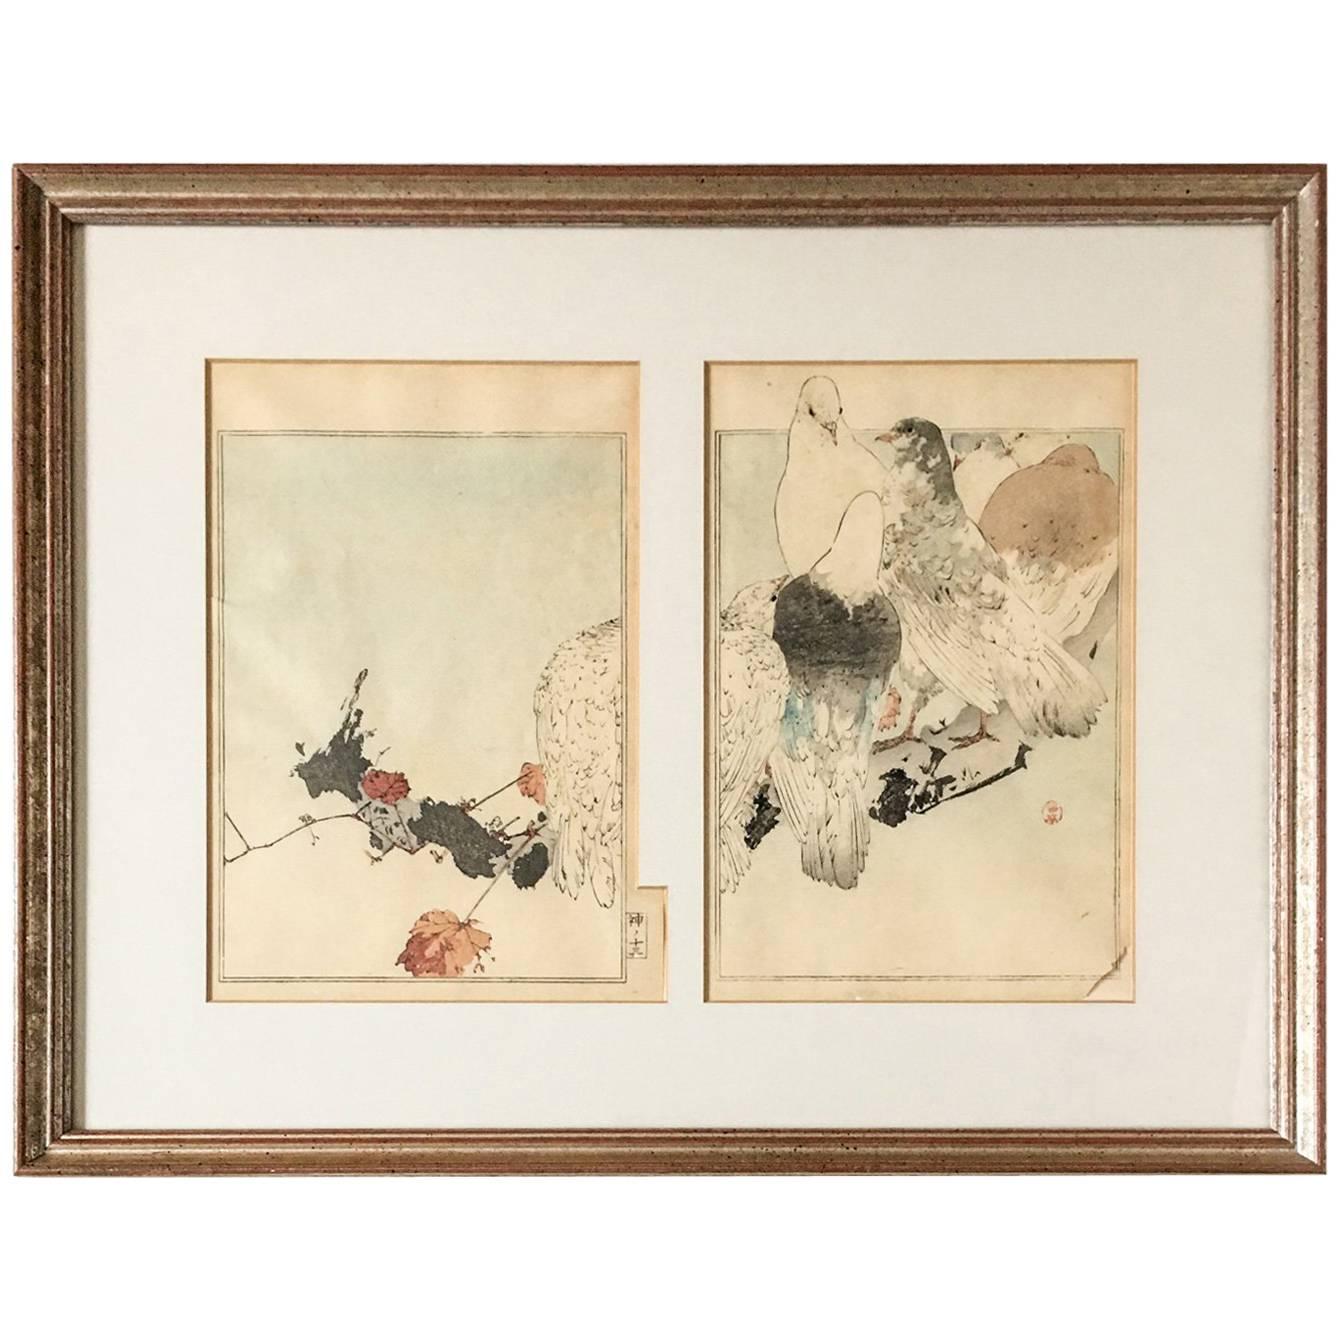 1960s Japanese Pen and Watercolor Painting of Five Pigeons on a Branch